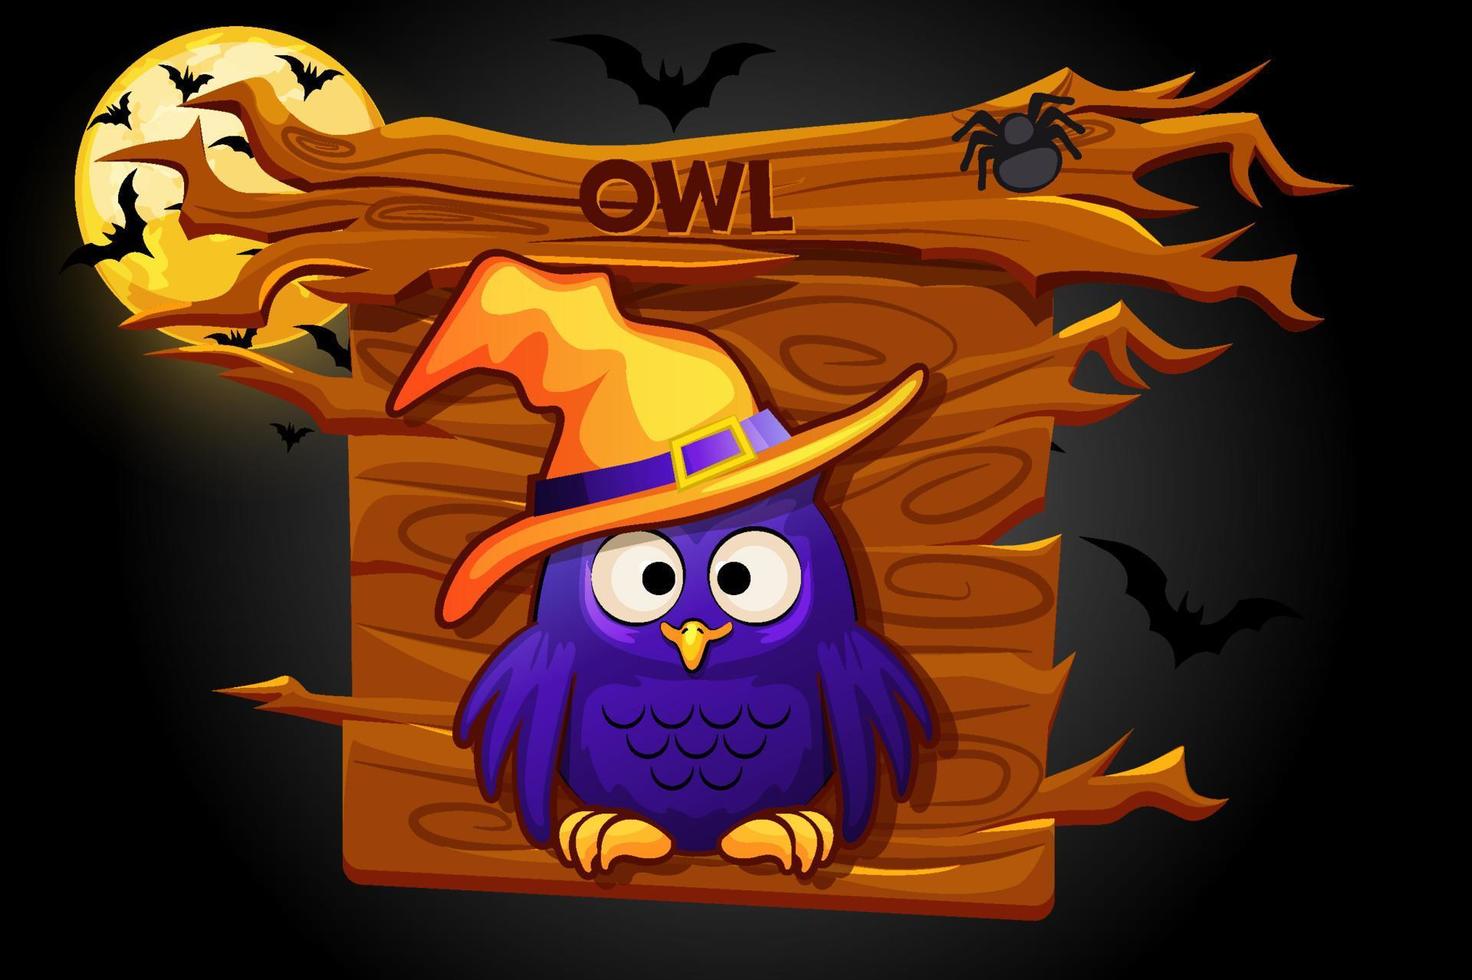 Owl game icon, wood banner for graphical user interface. Vector illustration of a halloween banner with bird and moon.